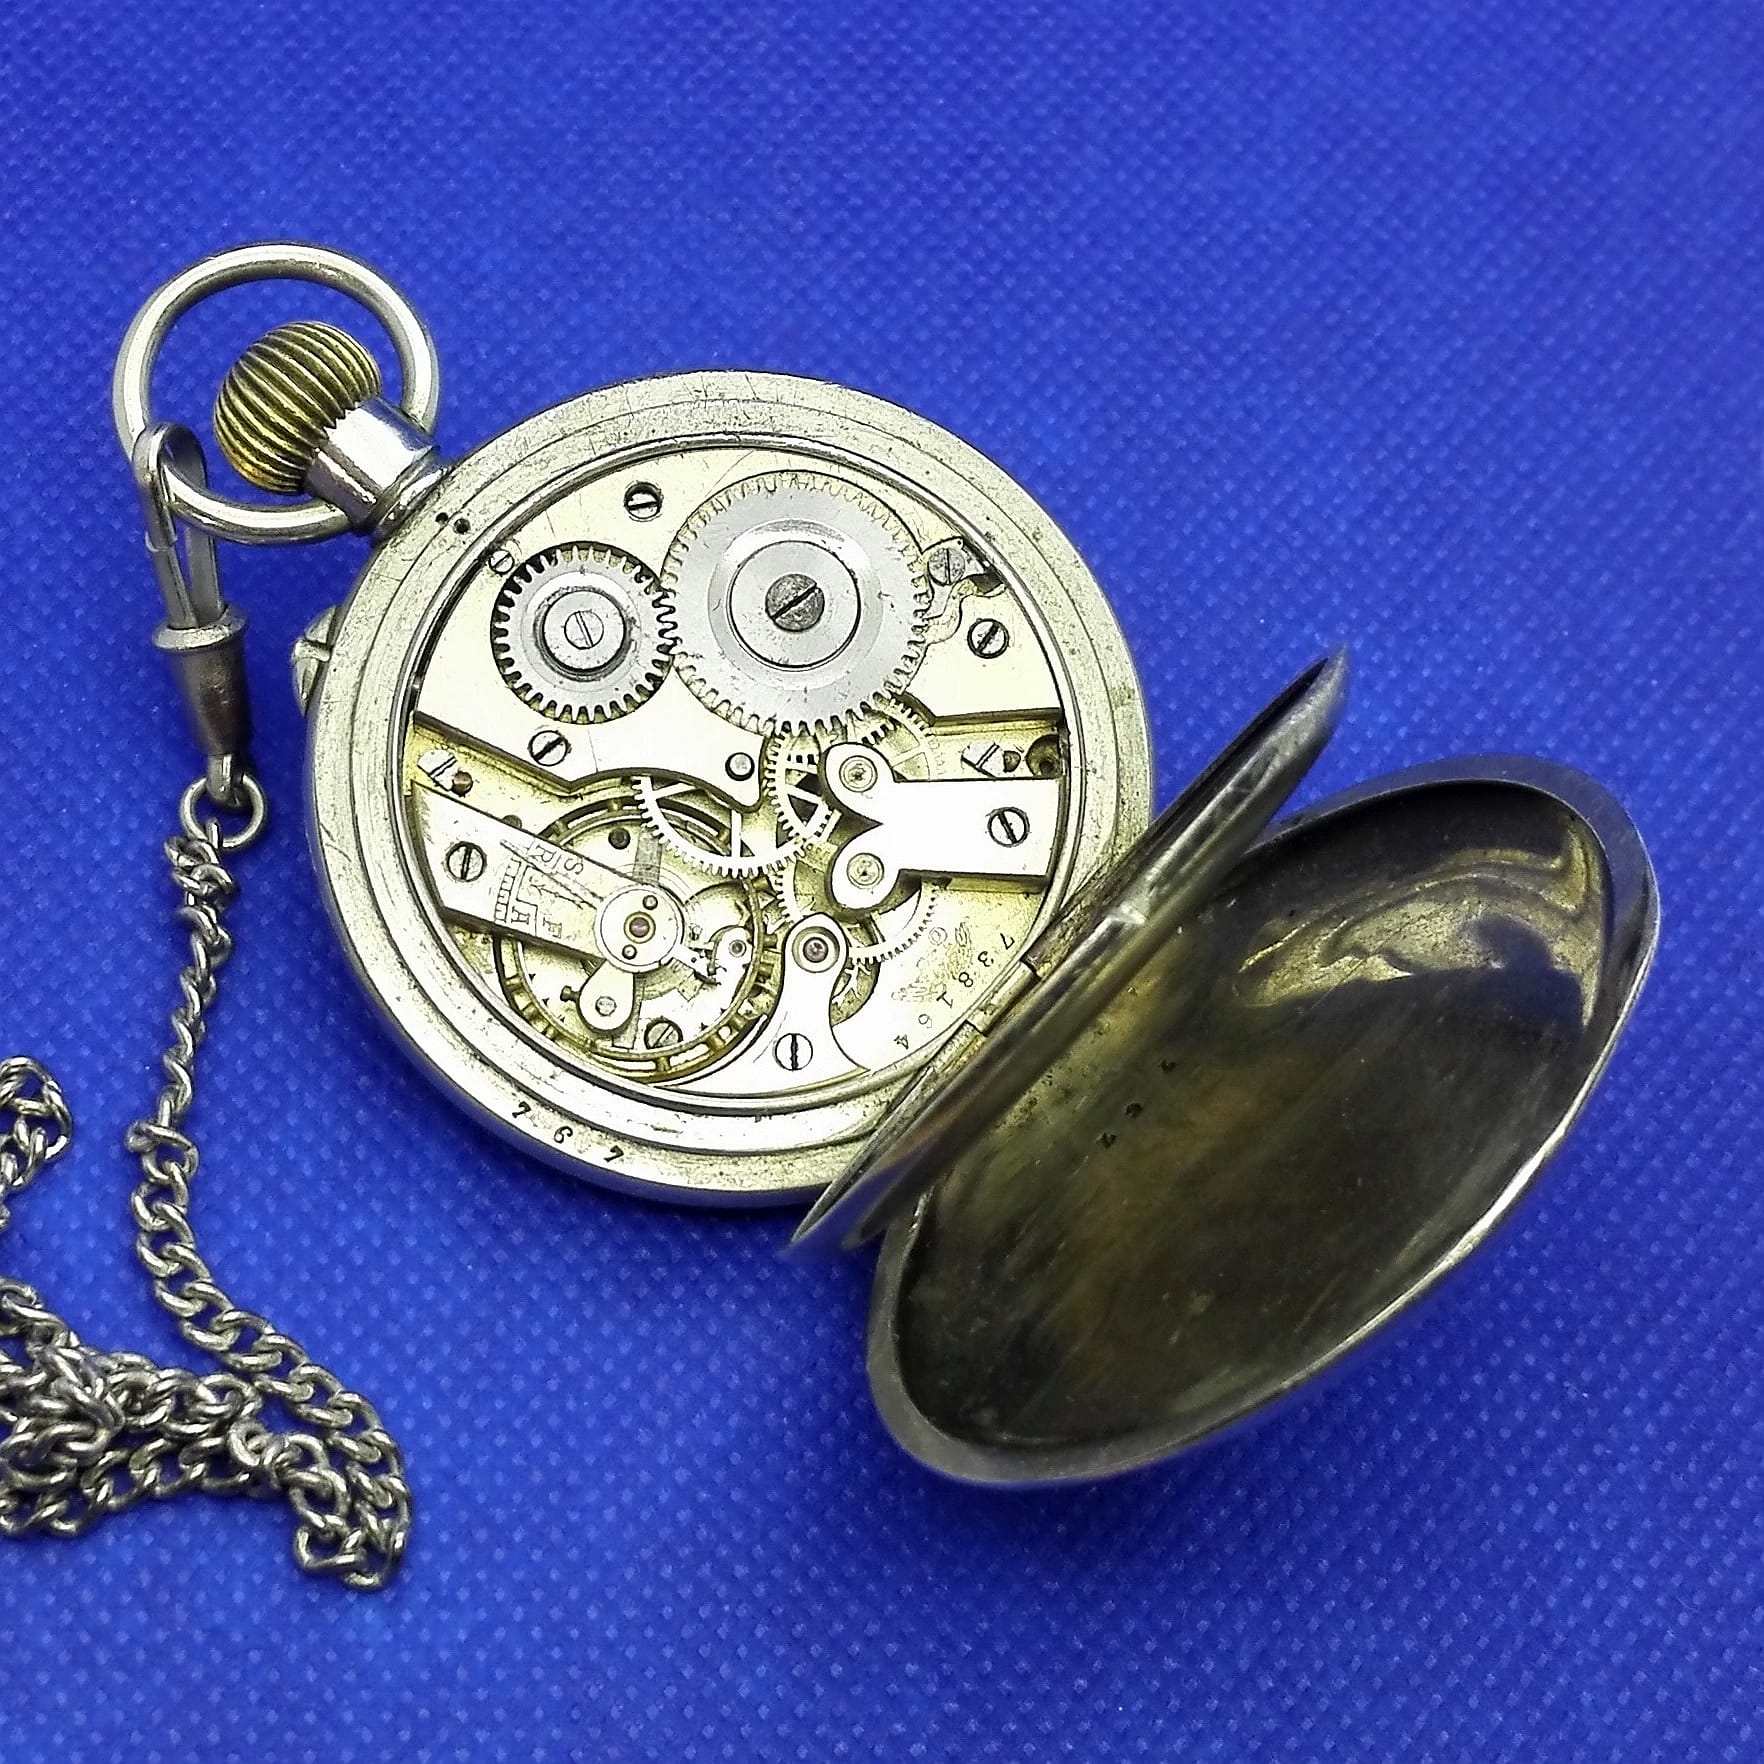 14K Gold Eclipse Movement Pocket Watch with Hand Engraved Griffins -  Timekeepersclayton